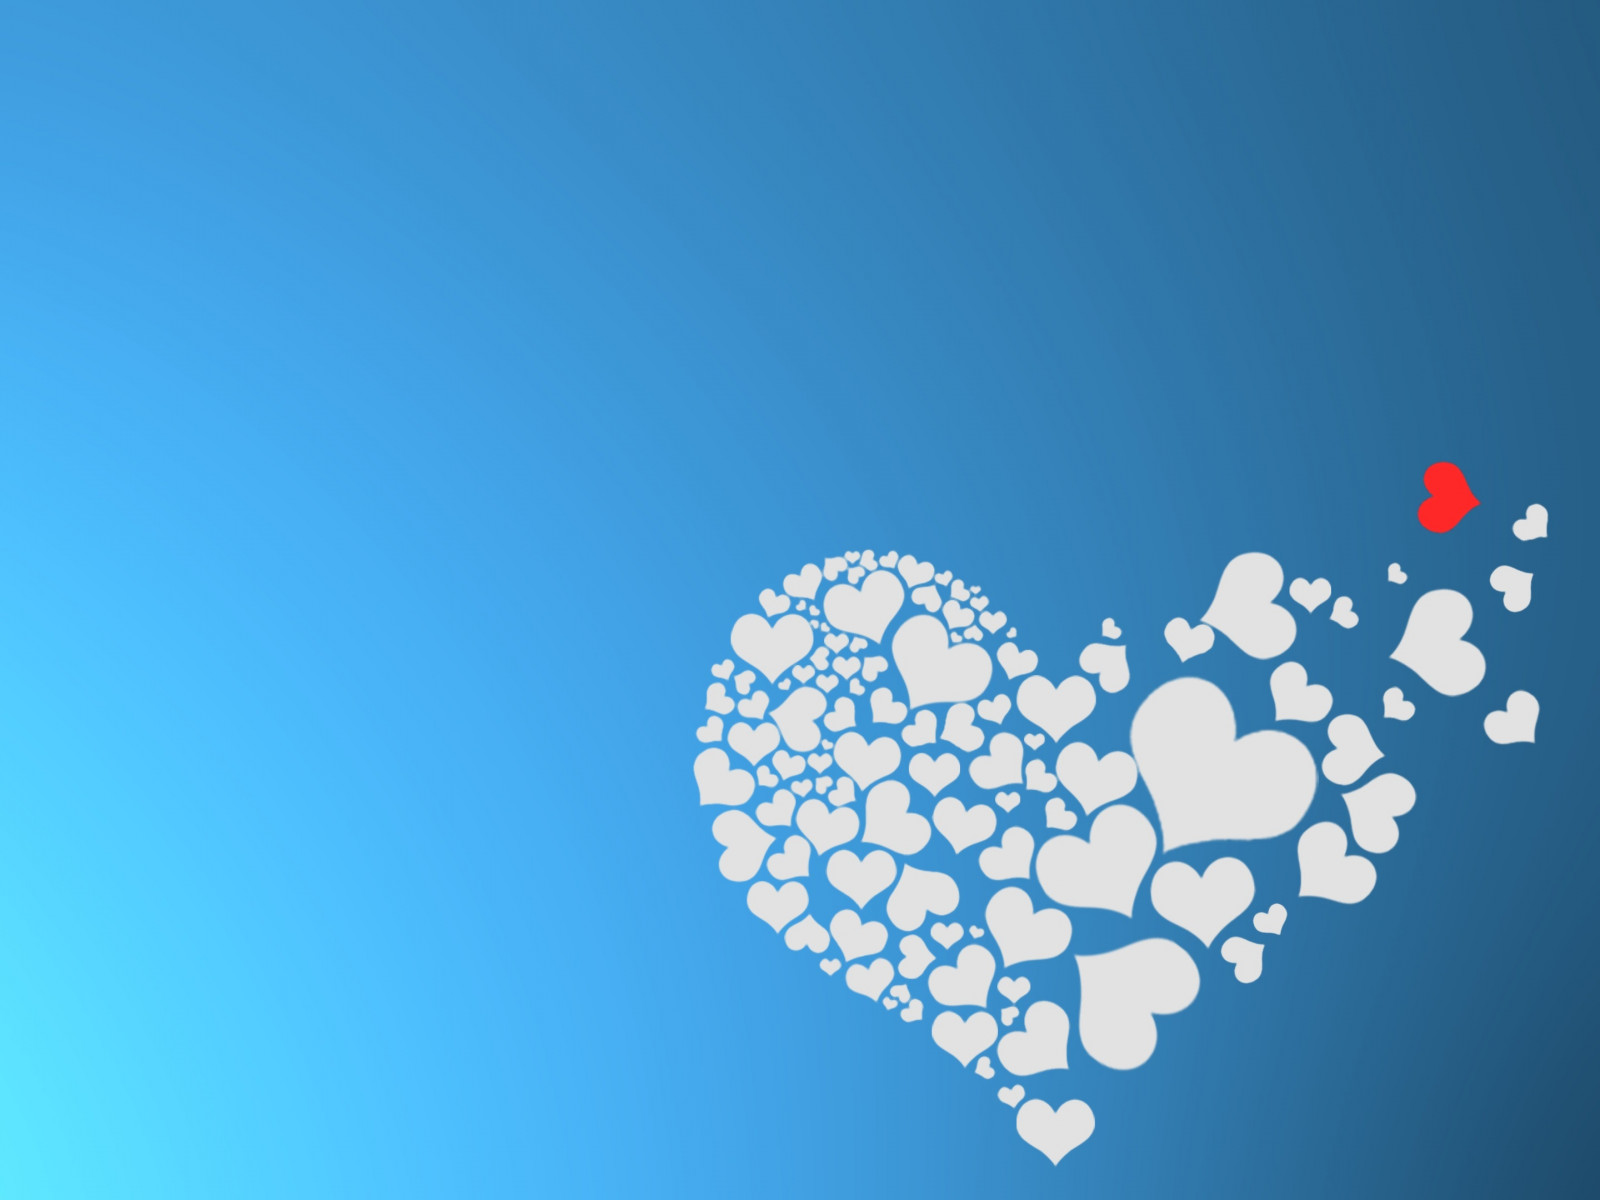 The hearts of love wallpaper 1600x1200